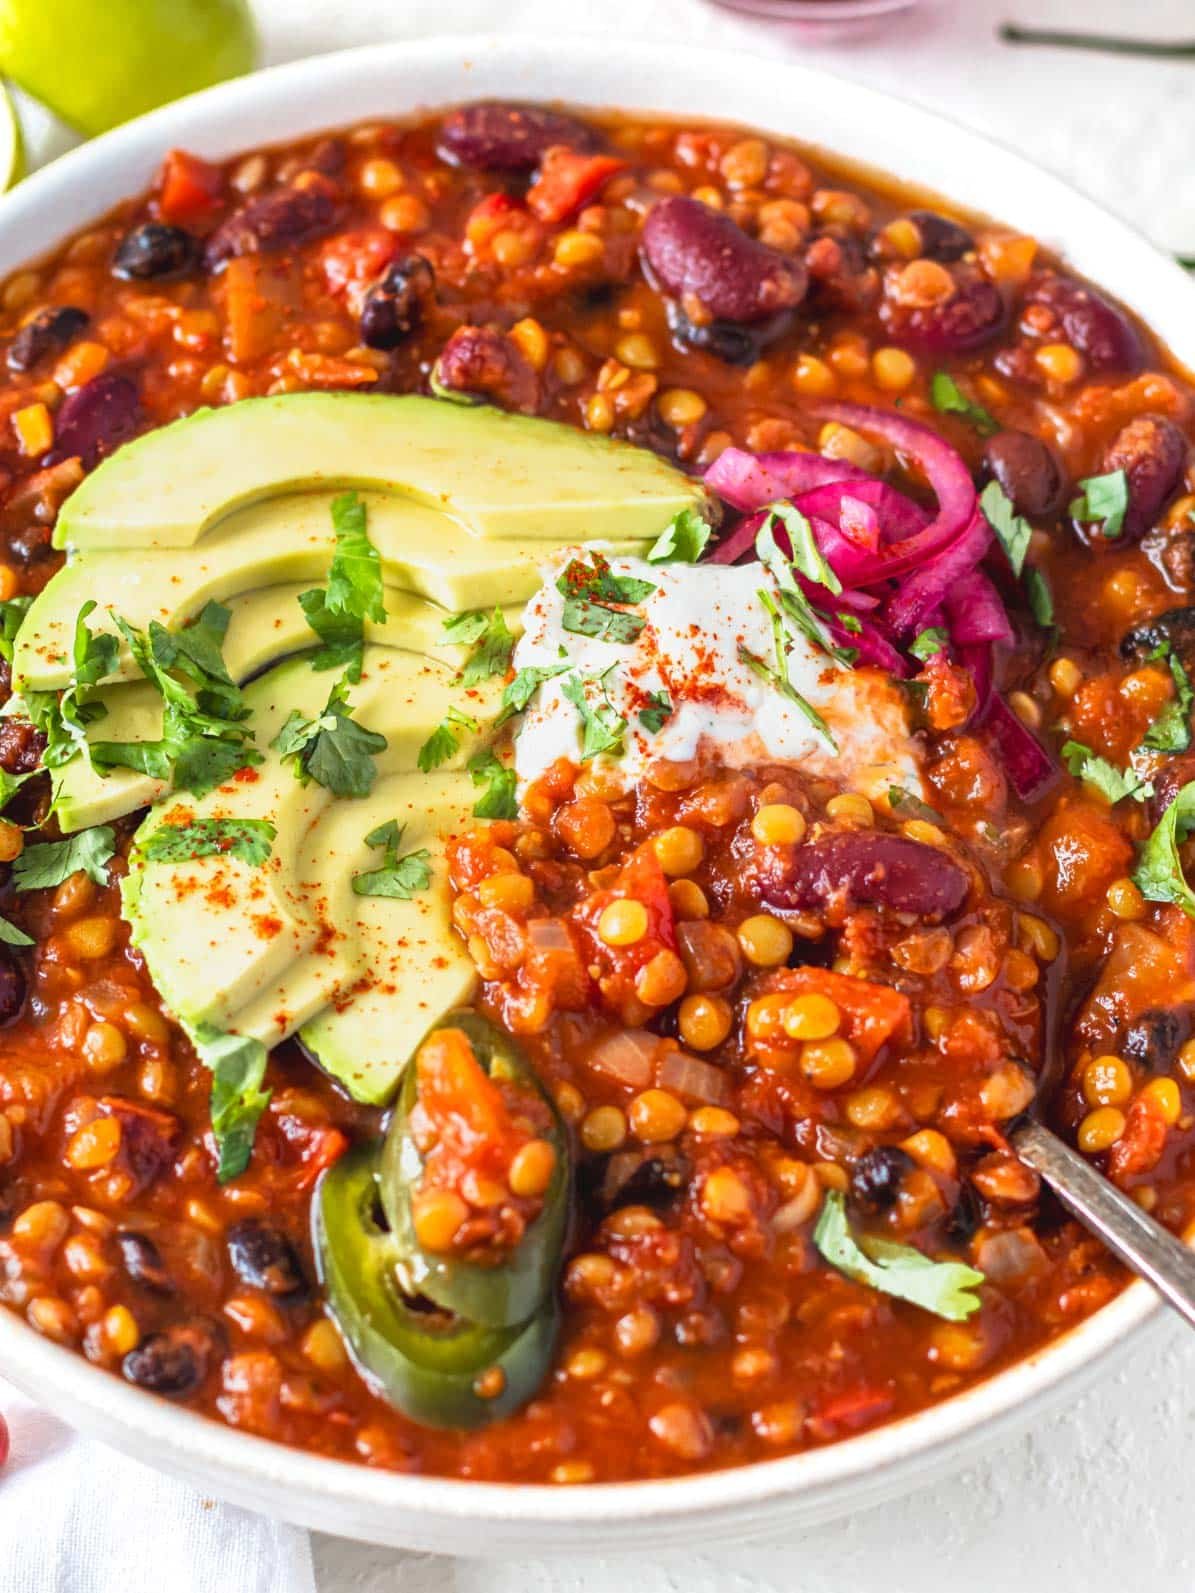 Lentil chili with avocado and pickled red onions